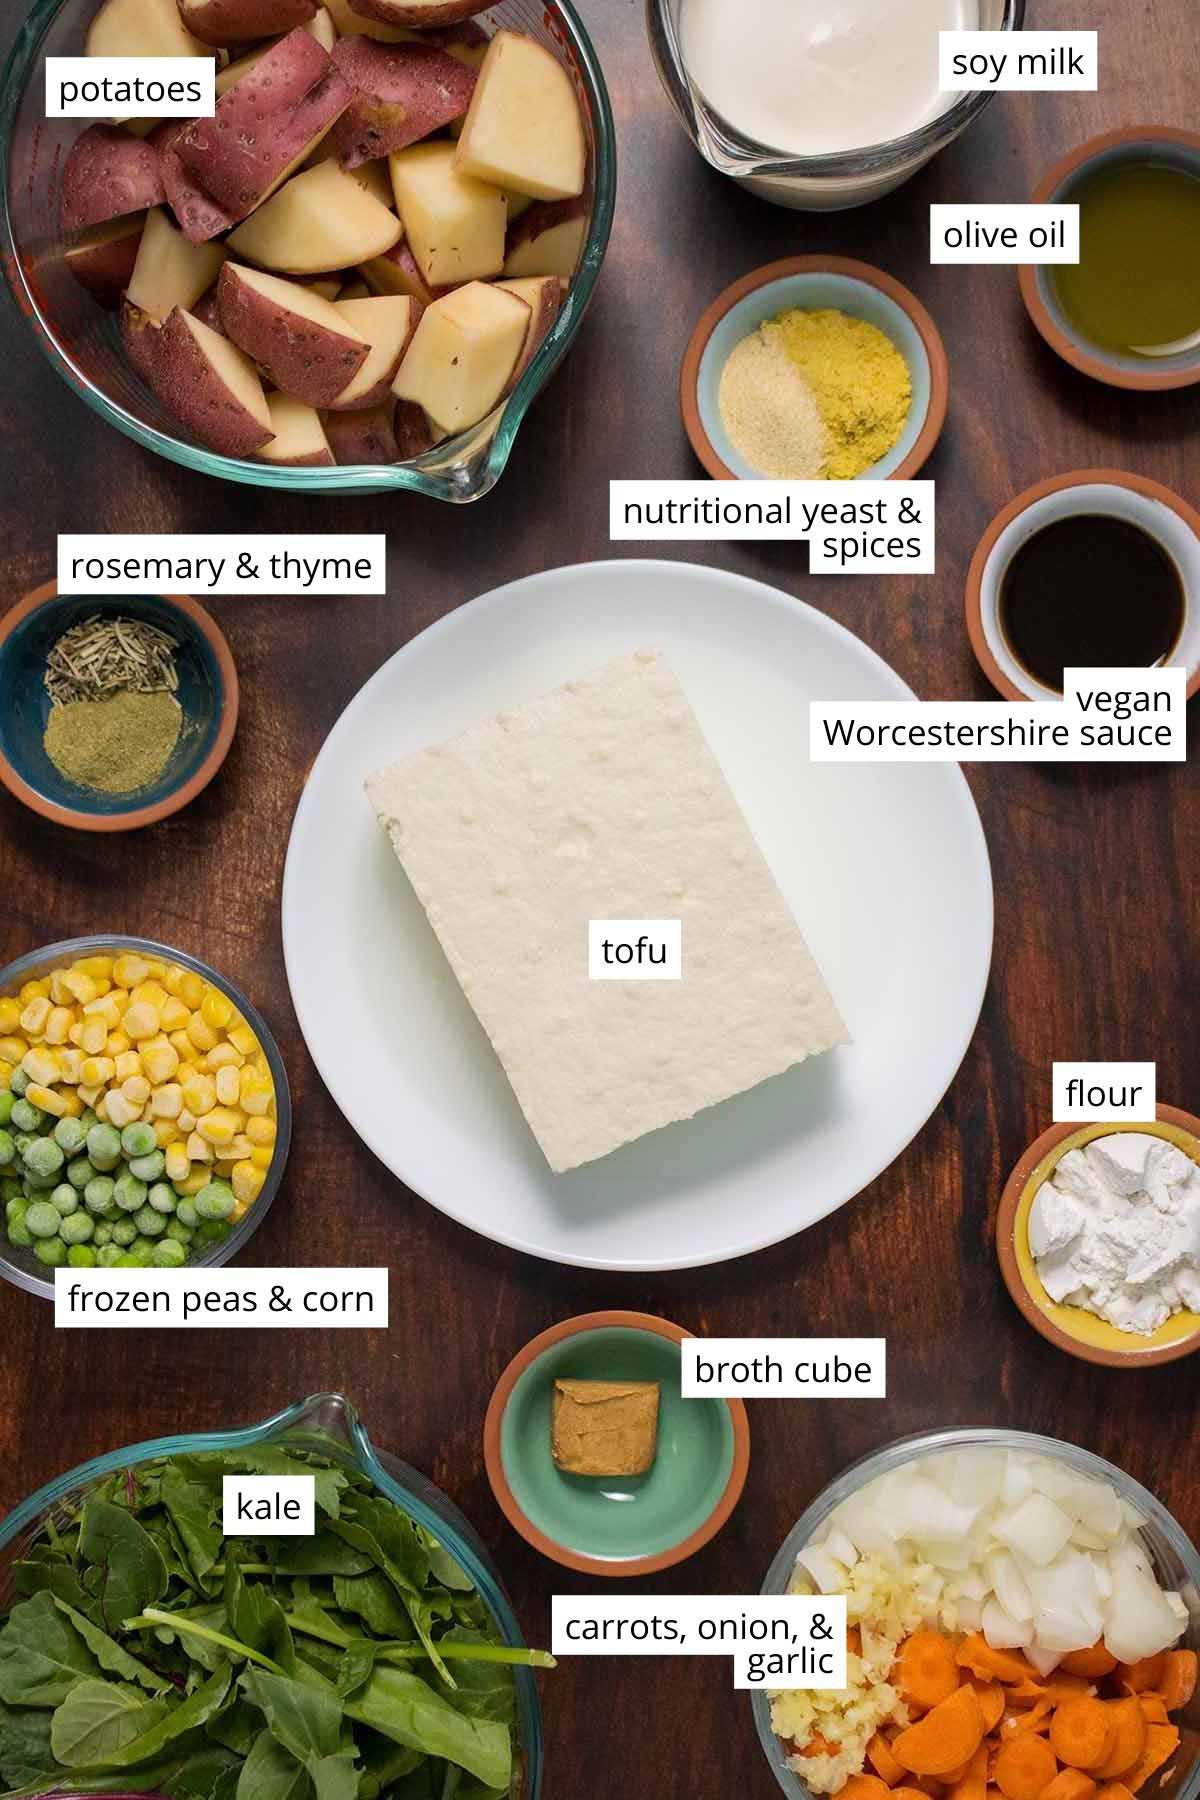 tofu, veggies, and seasonings in bowls on a wooden table, text labels on each ingredient